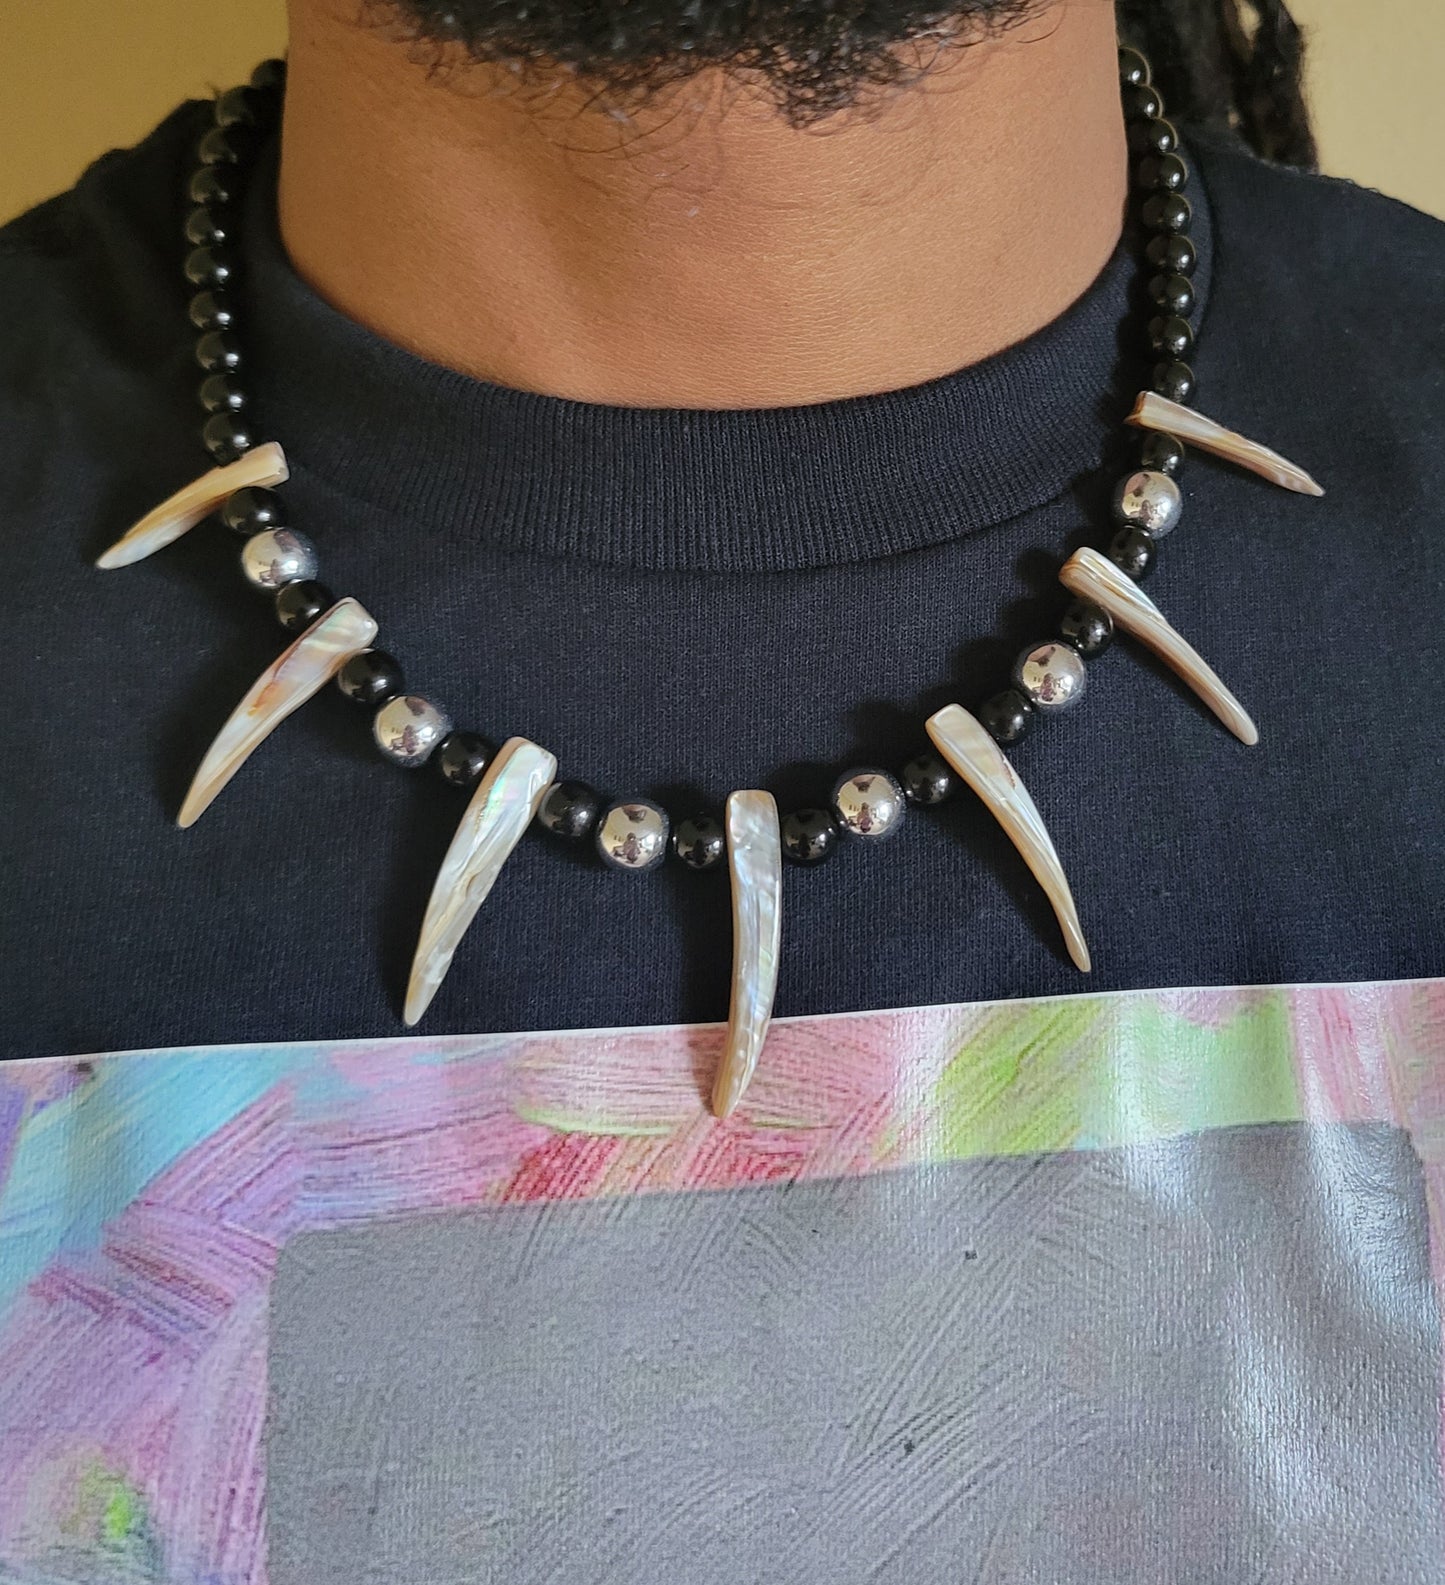 The Black Panther Necklace